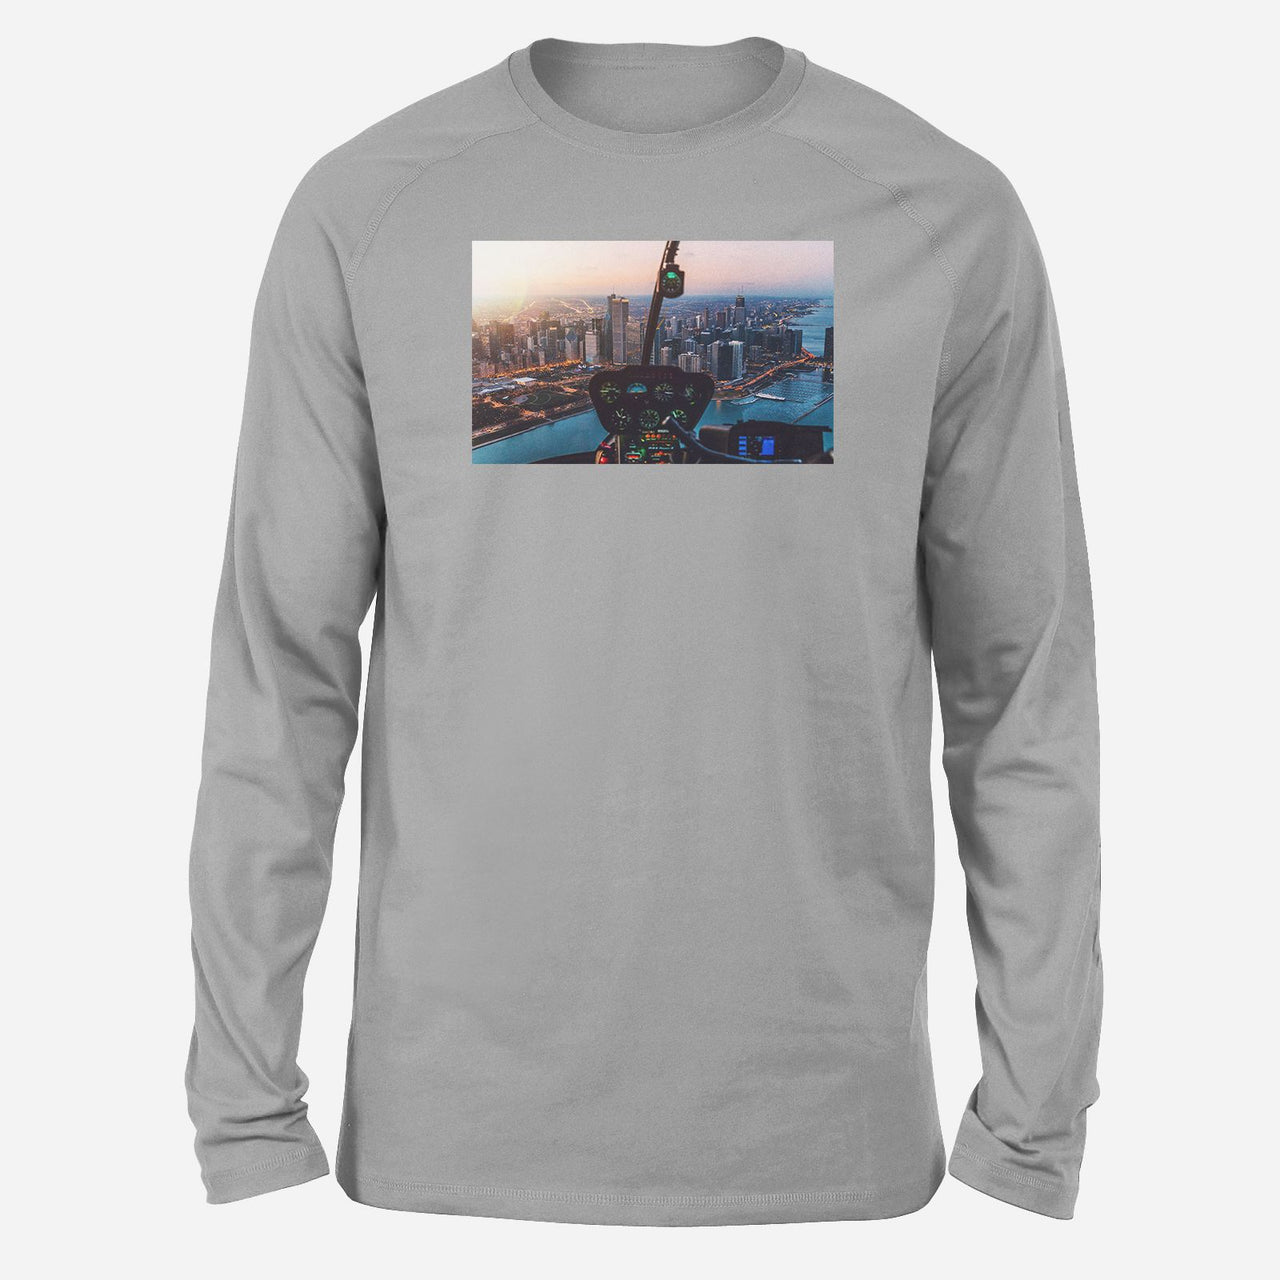 Amazing City View from Helicopter Cockpit Designed Long-Sleeve T-Shirts